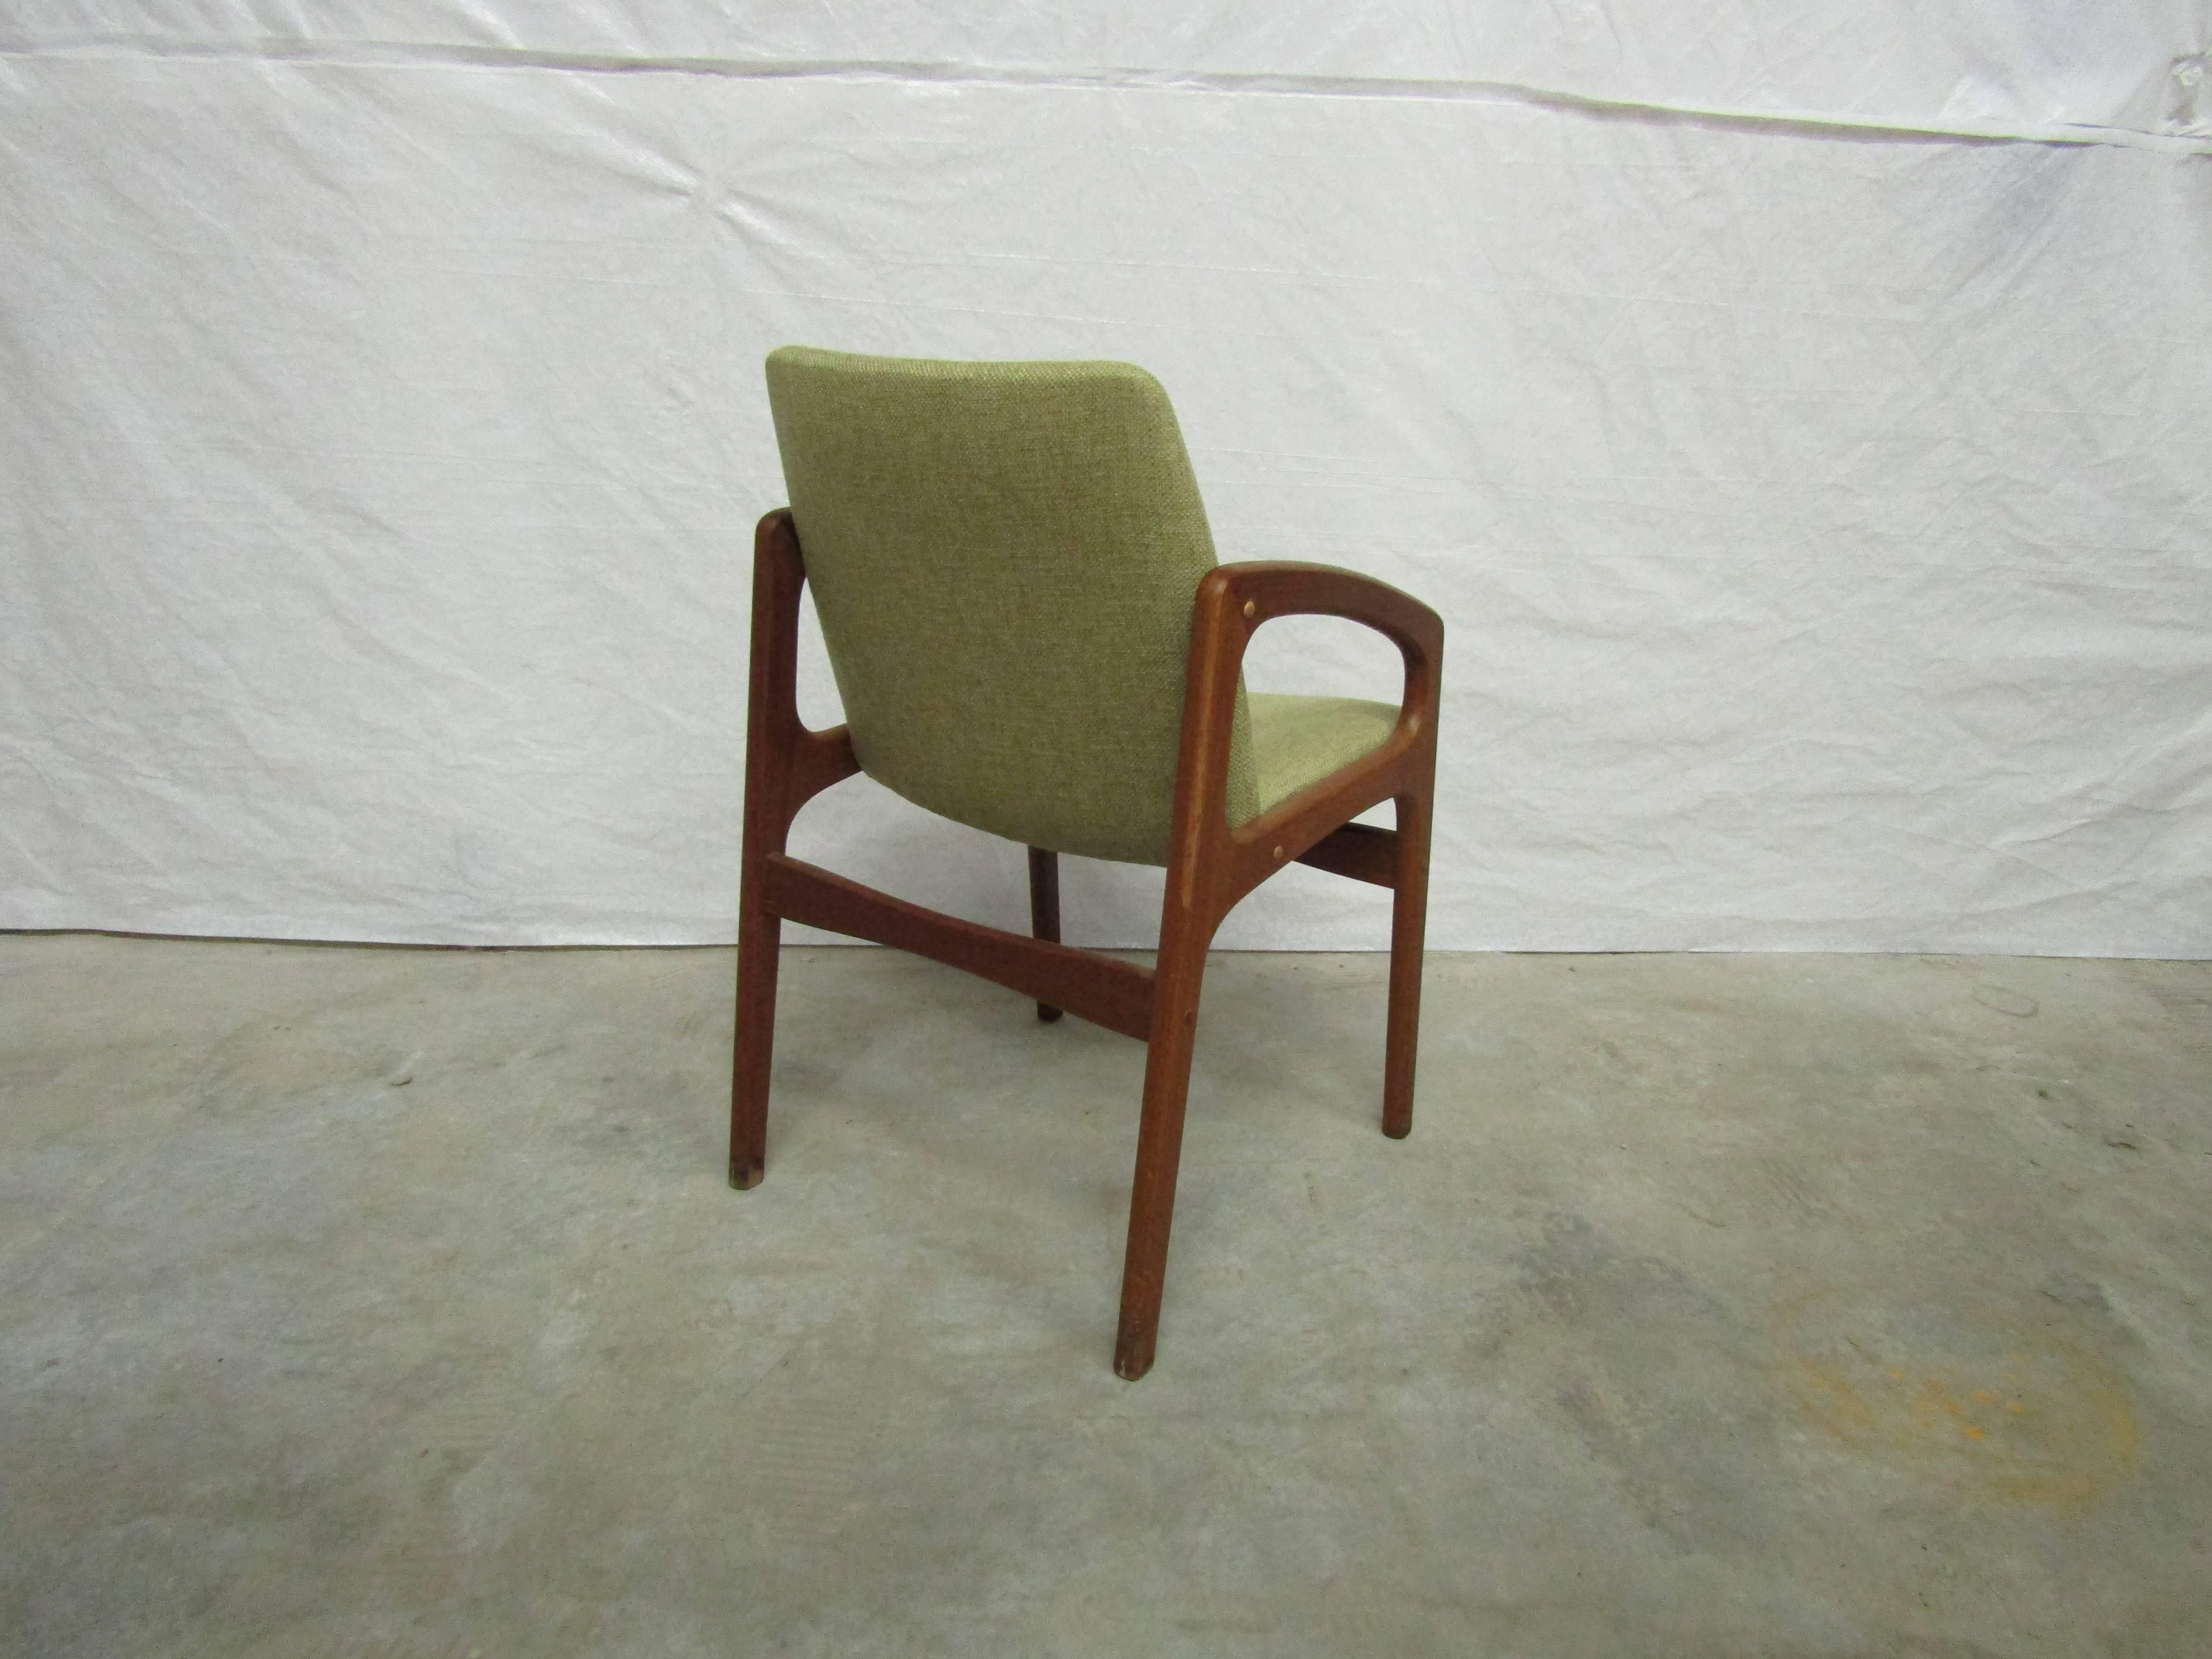 Cool Danish Teak Chairs, Set of two In Excellent Condition For Sale In Ottawa, ON